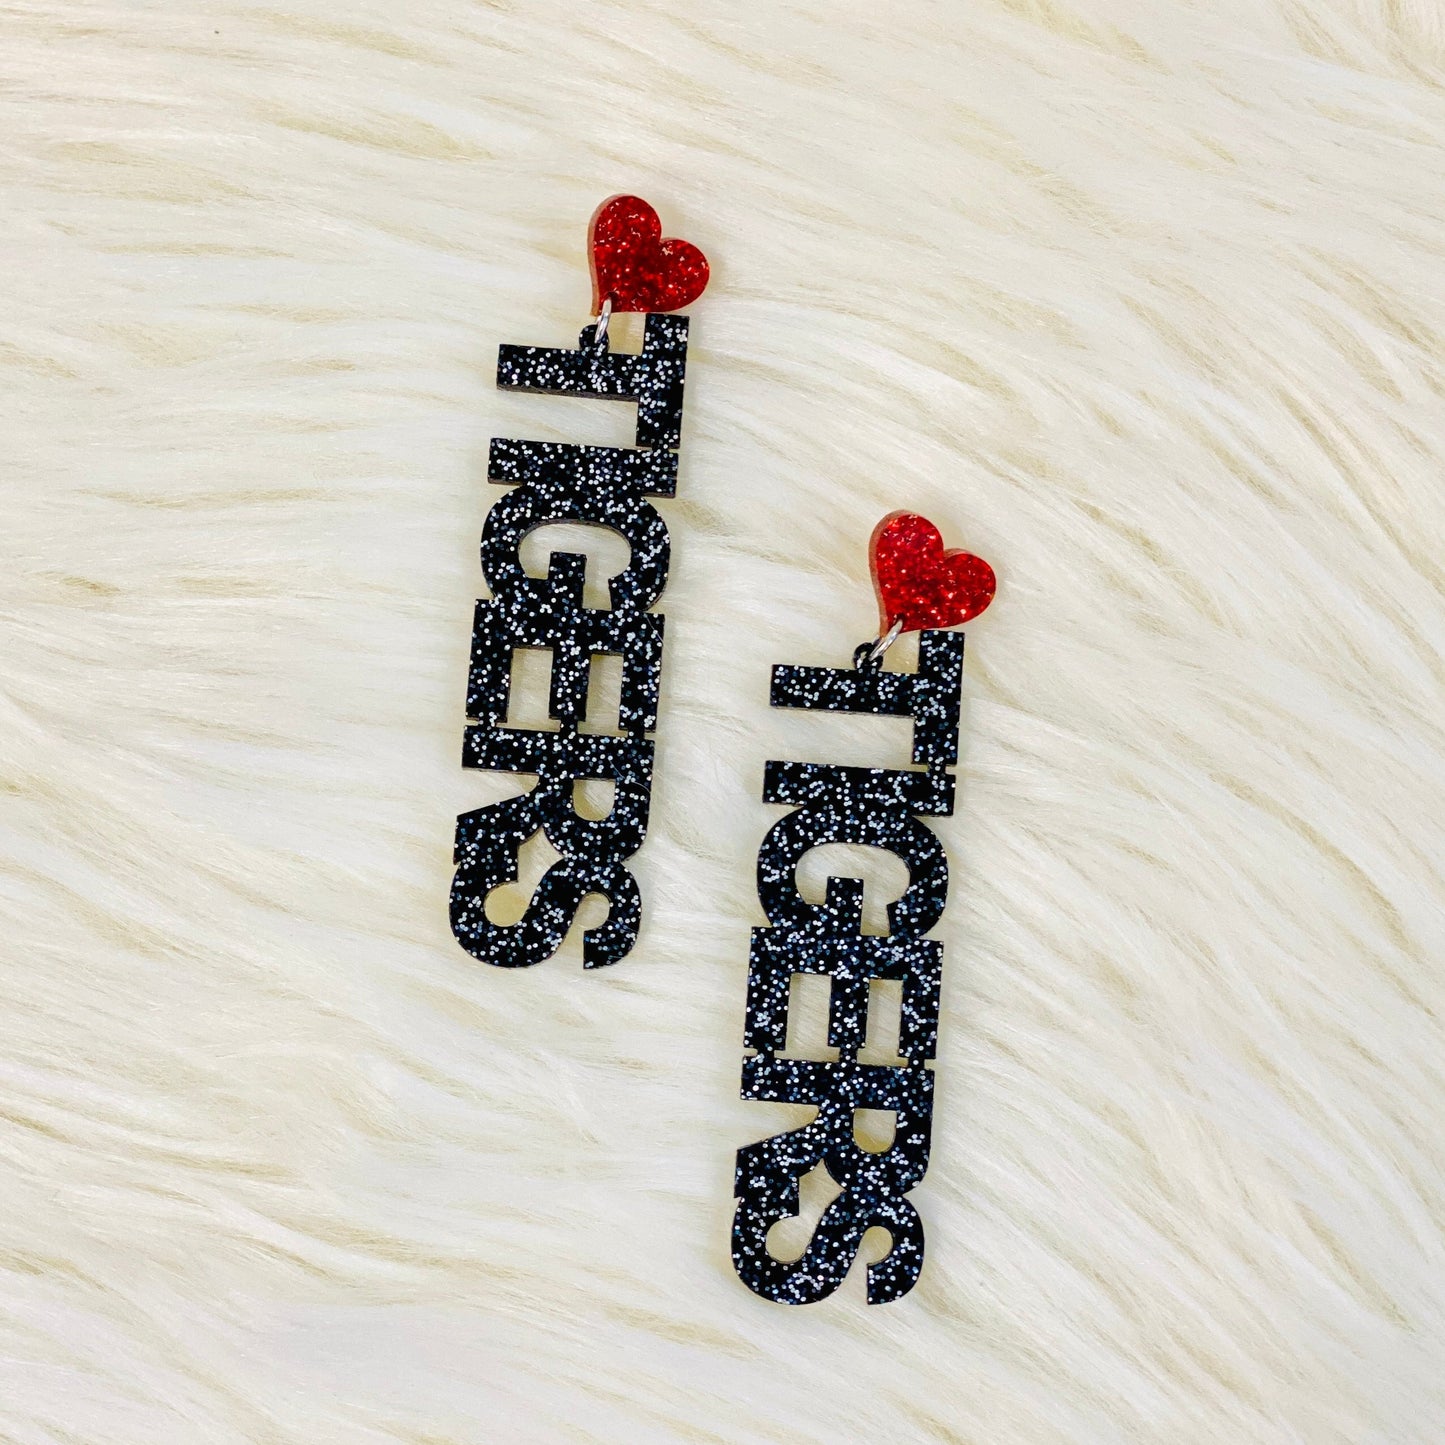 I Love Tigers Earrings You know you want to go all out for your Tigers team! Head to toe showing your pride for them. And these earrings are just the touch you're looking for. You're going to stand out wearing these cuties. At the top is a sparkly red heart and the word Tigers going down vertically in black sparkly letters. They are 3.25" in length and 0.75" wide. 